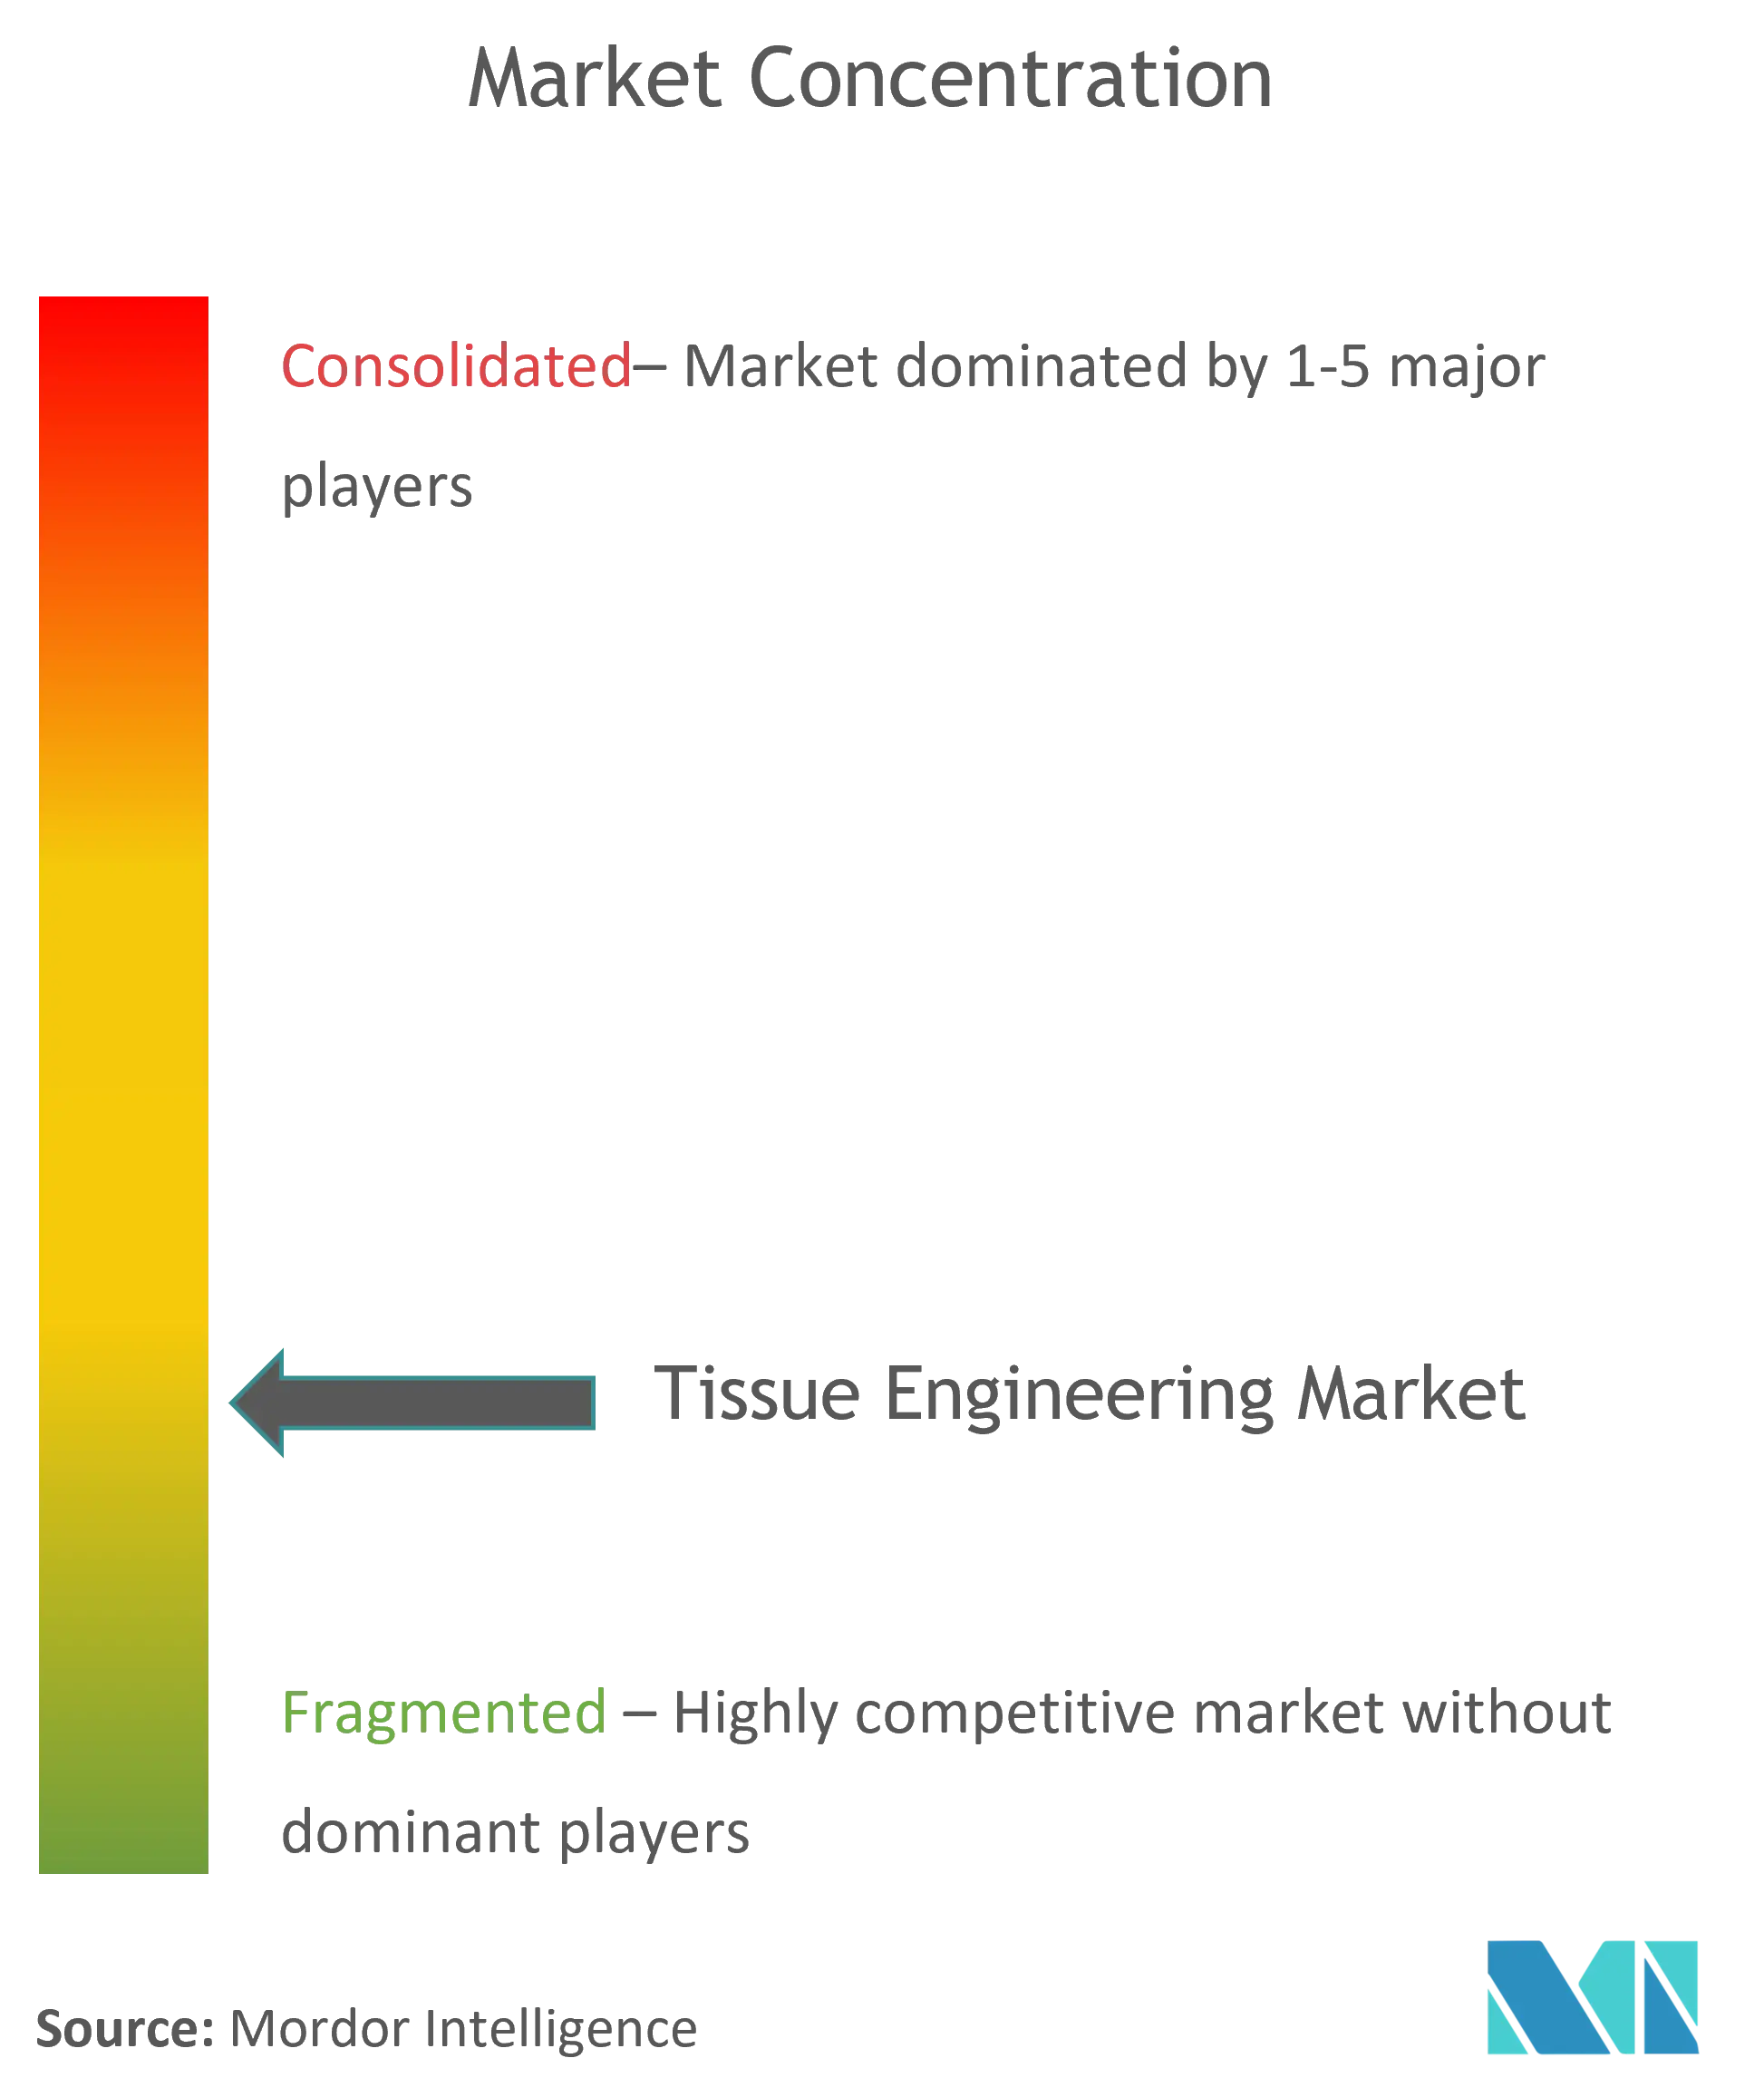 Tissue Engineering Market Concentration